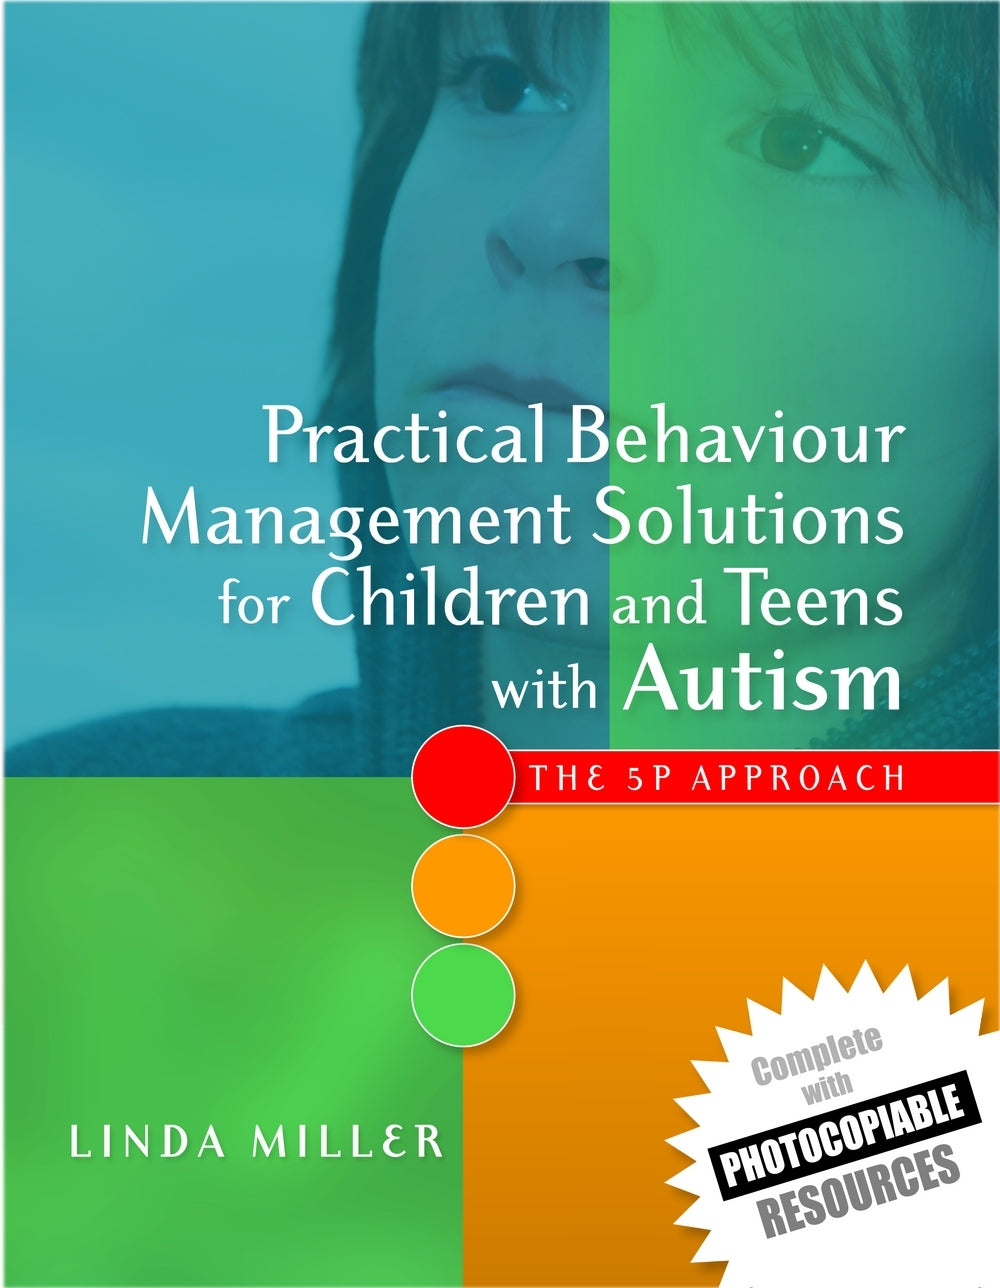 Practical Behaviour Management Solutions for Children and Teens with Autism by Linda Miller